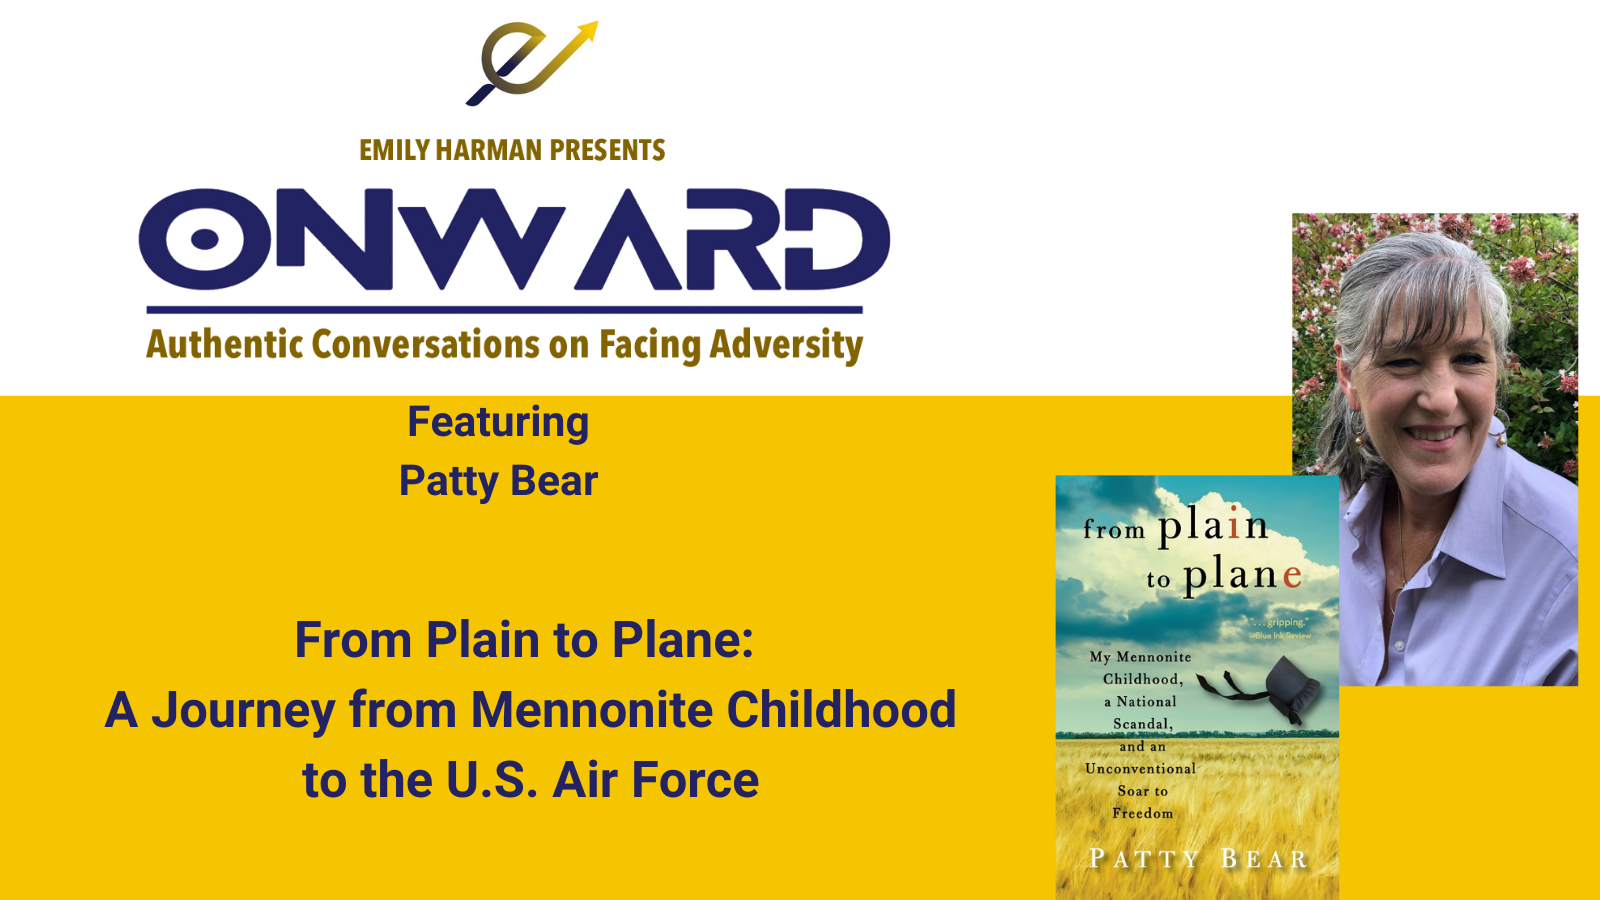 From Plain to Plane: My Mennonite Childhood, A National Scandal, and an  Unconventional Soar to Freedom